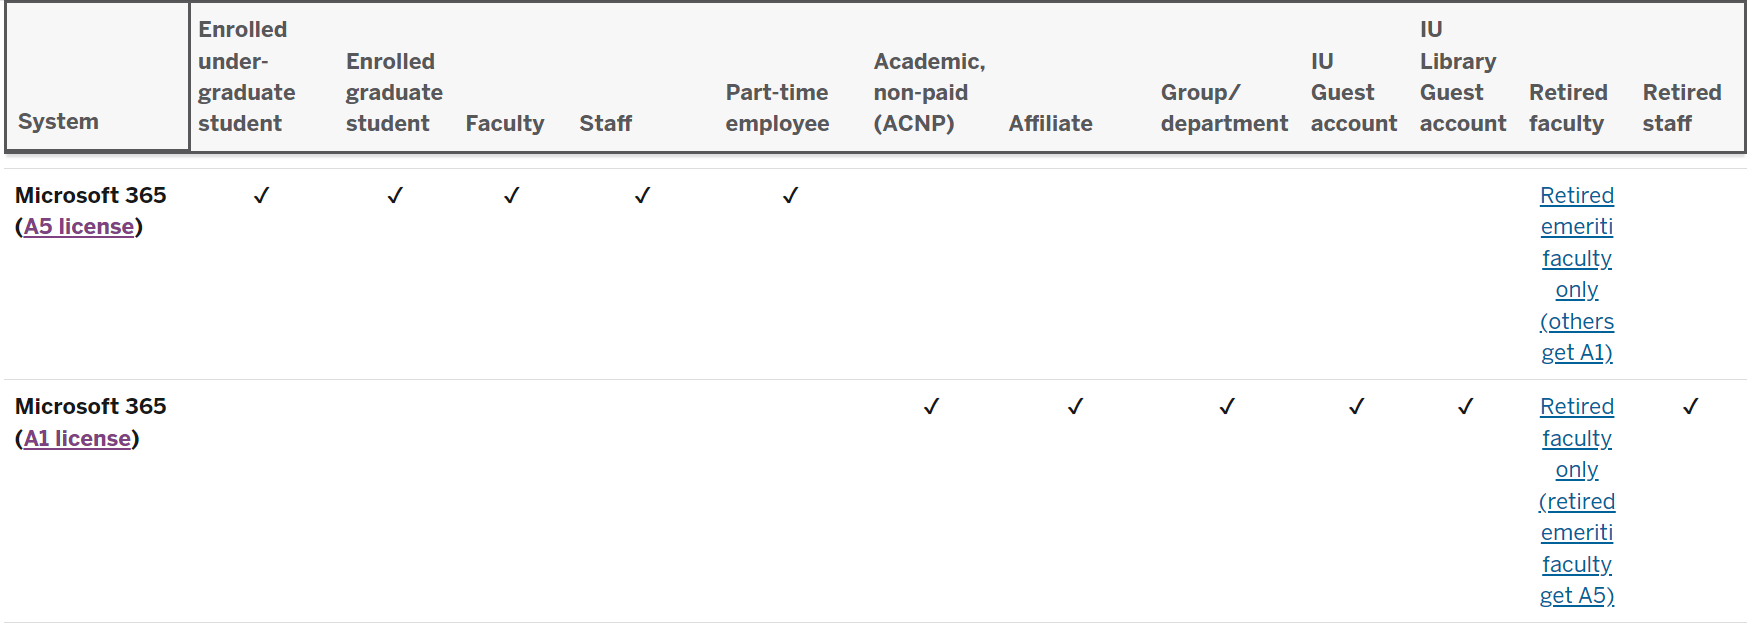 Screenshot from https://kb.iu.edu/d/auia indicating that Enrolled undergraduate students, enrolled graduate students, faculty, staff, part-time employees, academic (non-paid) accounts, affiliate accounts, group accounts, department accounts, IU Guest accounts, IU Library guest accounts, retired faculty, and retired staff have access to Microsoft 365 at IU. 